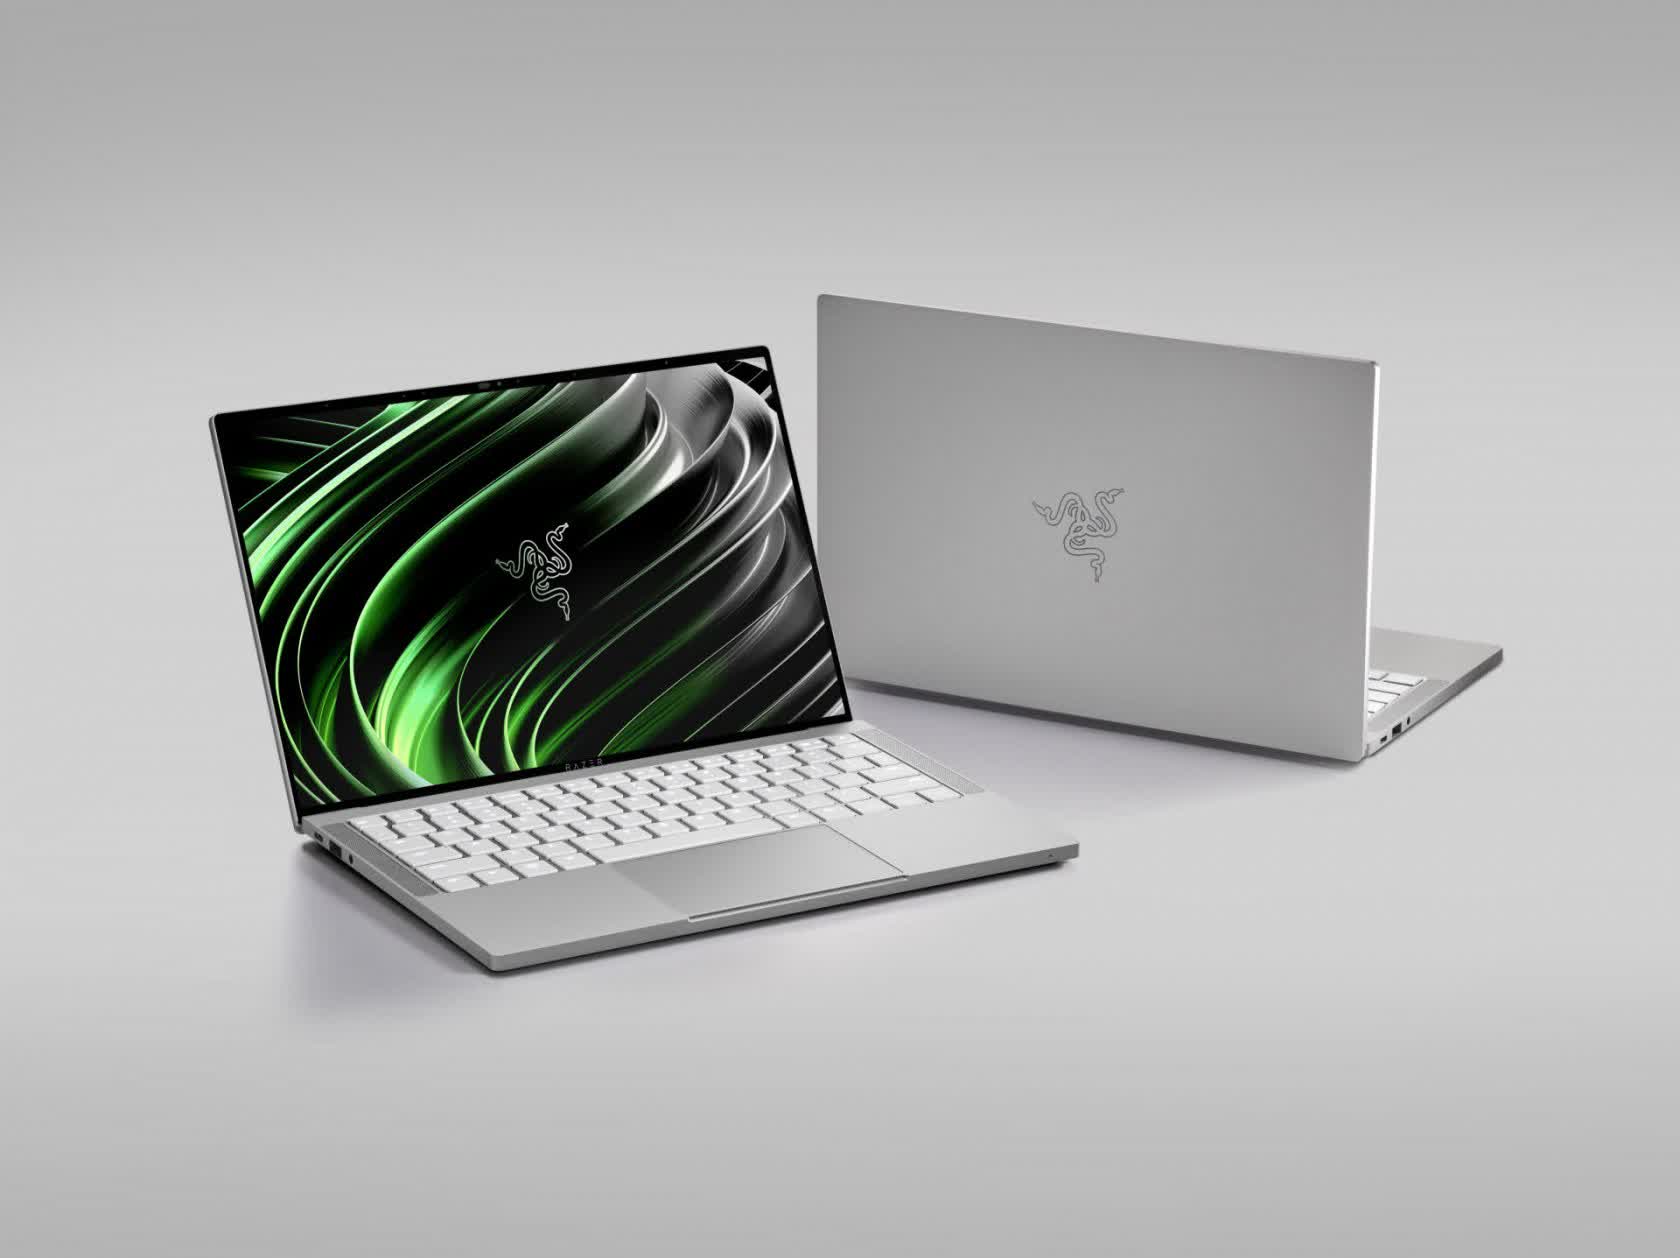 Razer unveils the Razer Book 13, its first 'ultraportable' productivity notebook